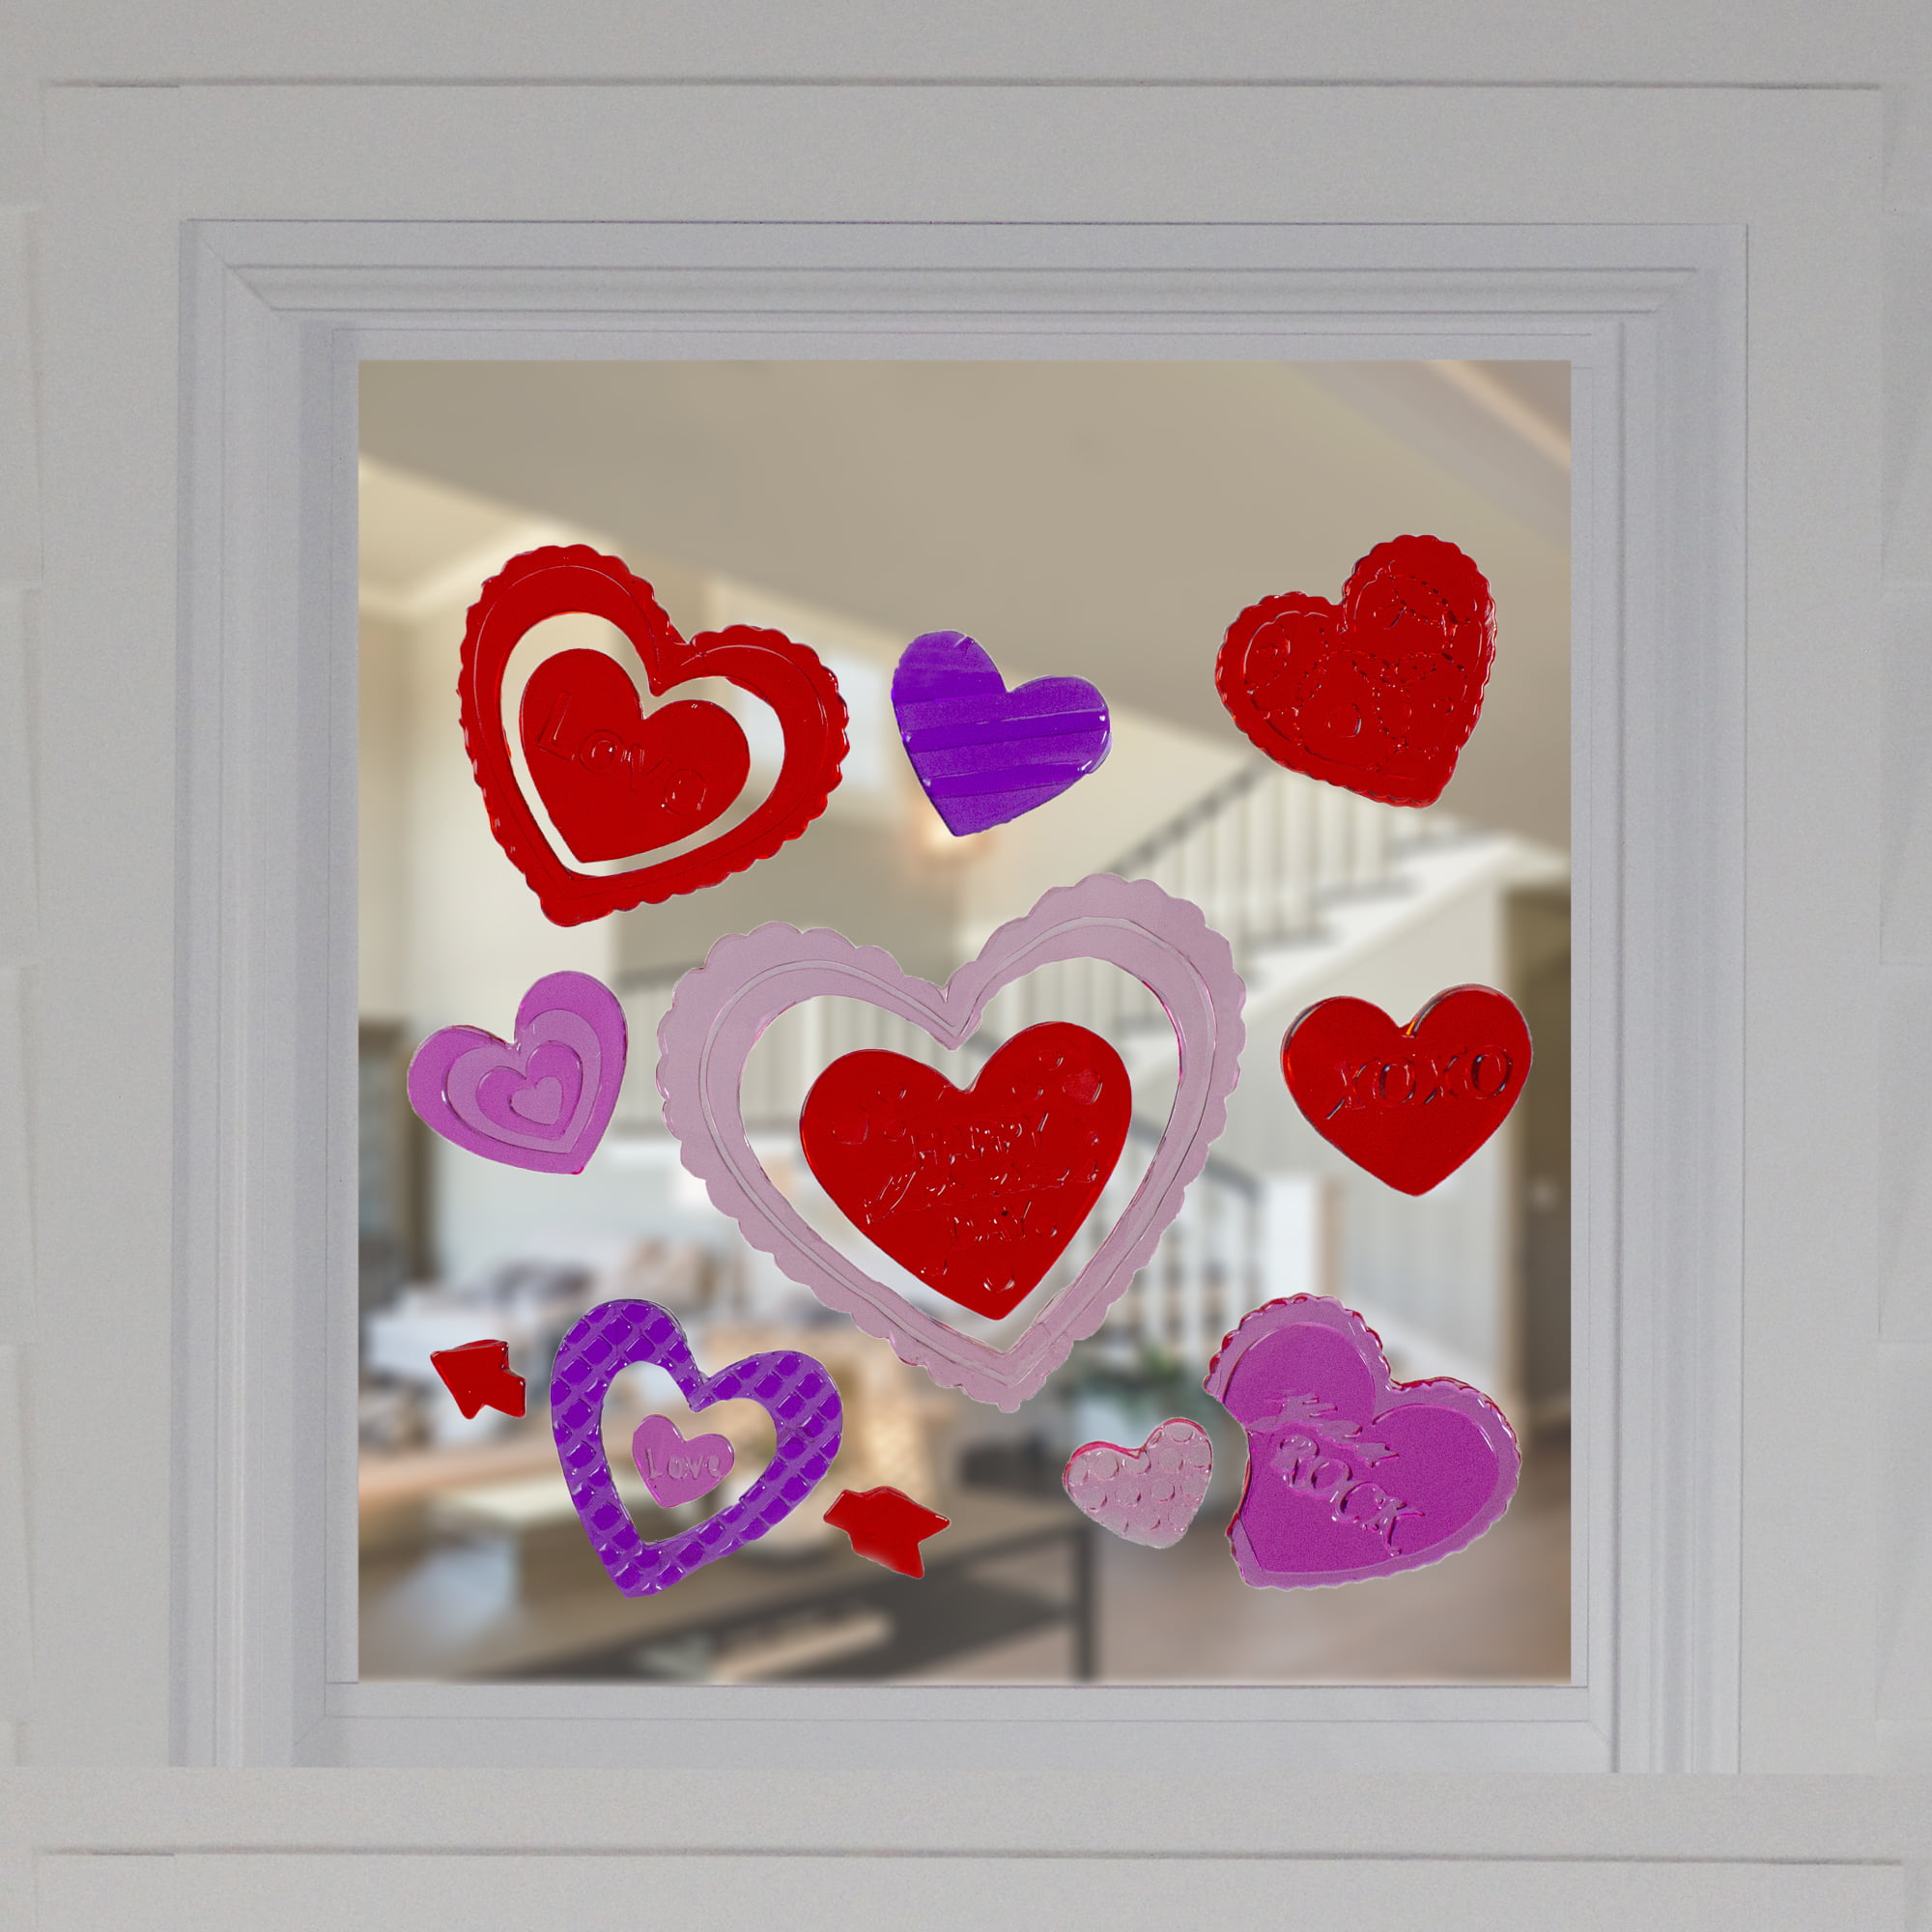 Happy Valentine's Day Window GEL Clings Teacher Supply Decoration Hearts 29 Ct for sale online 